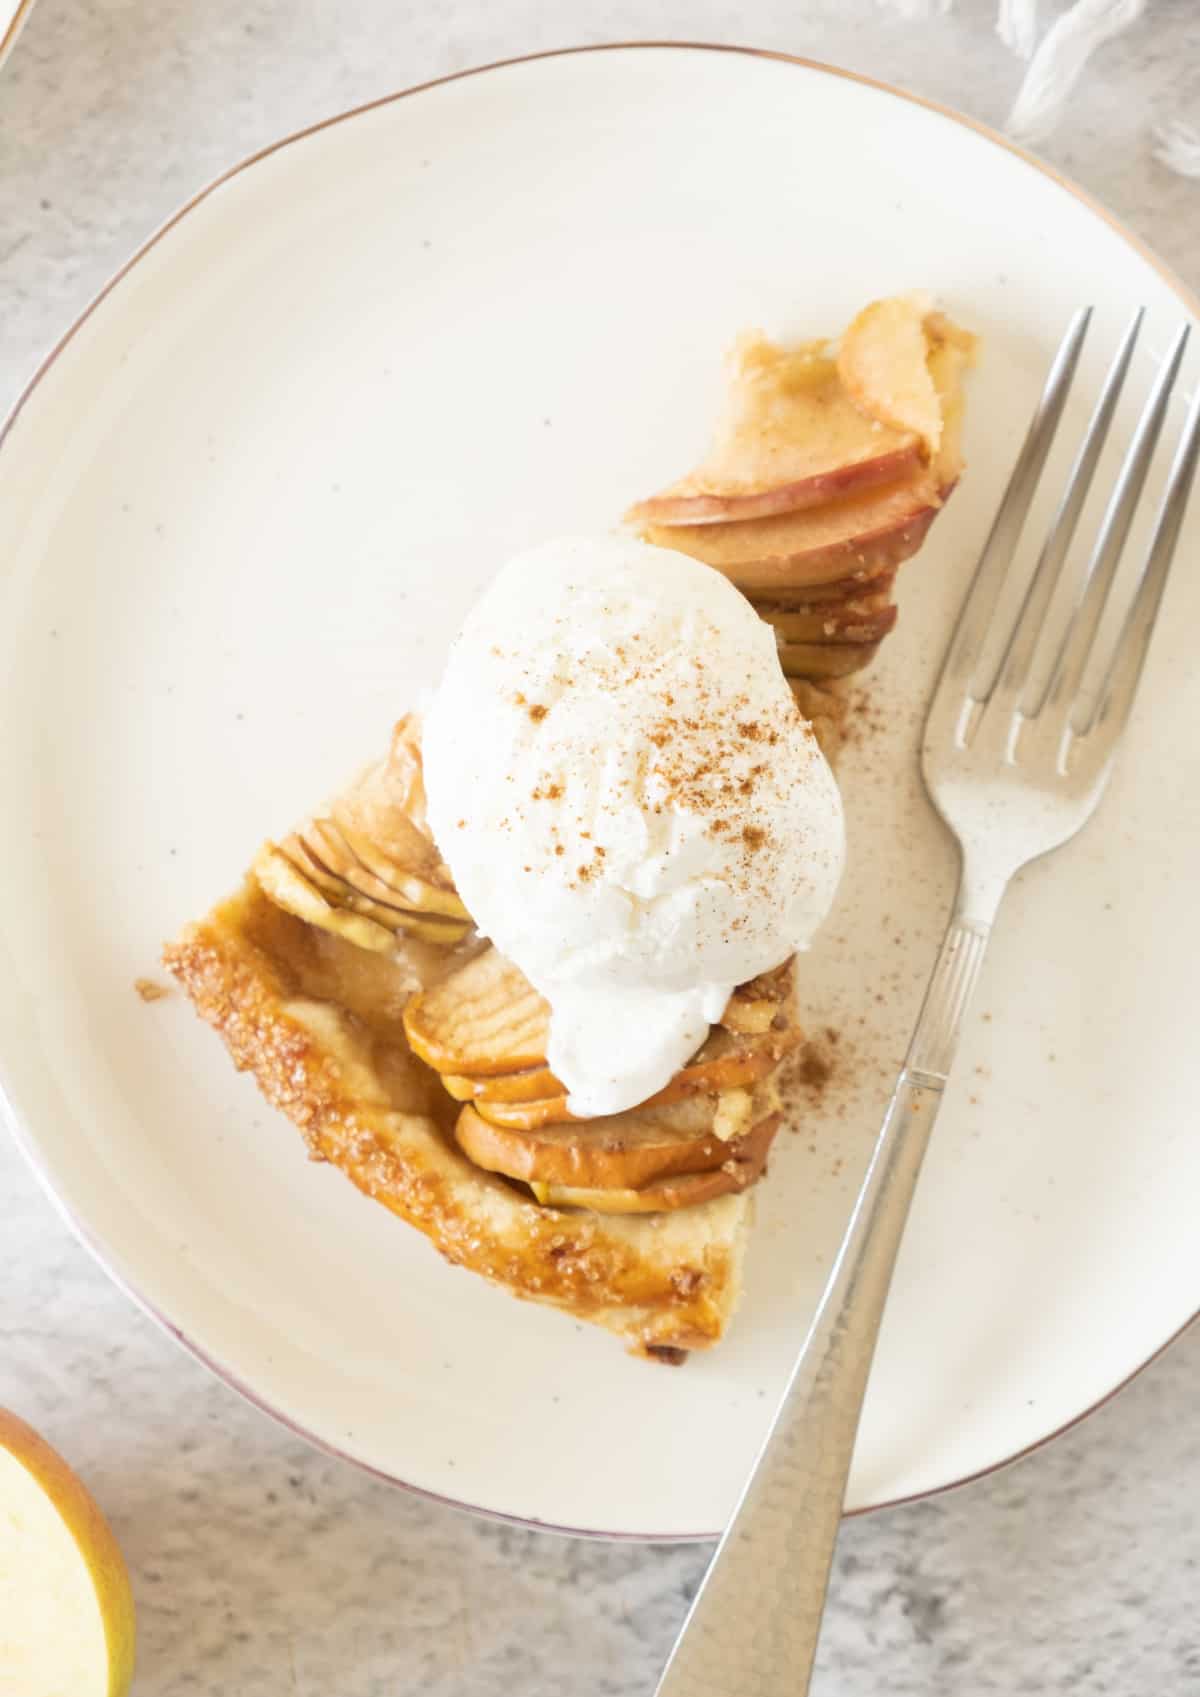 A slice of apple tart with cream on a white plate. A silver fork. Grey surface.